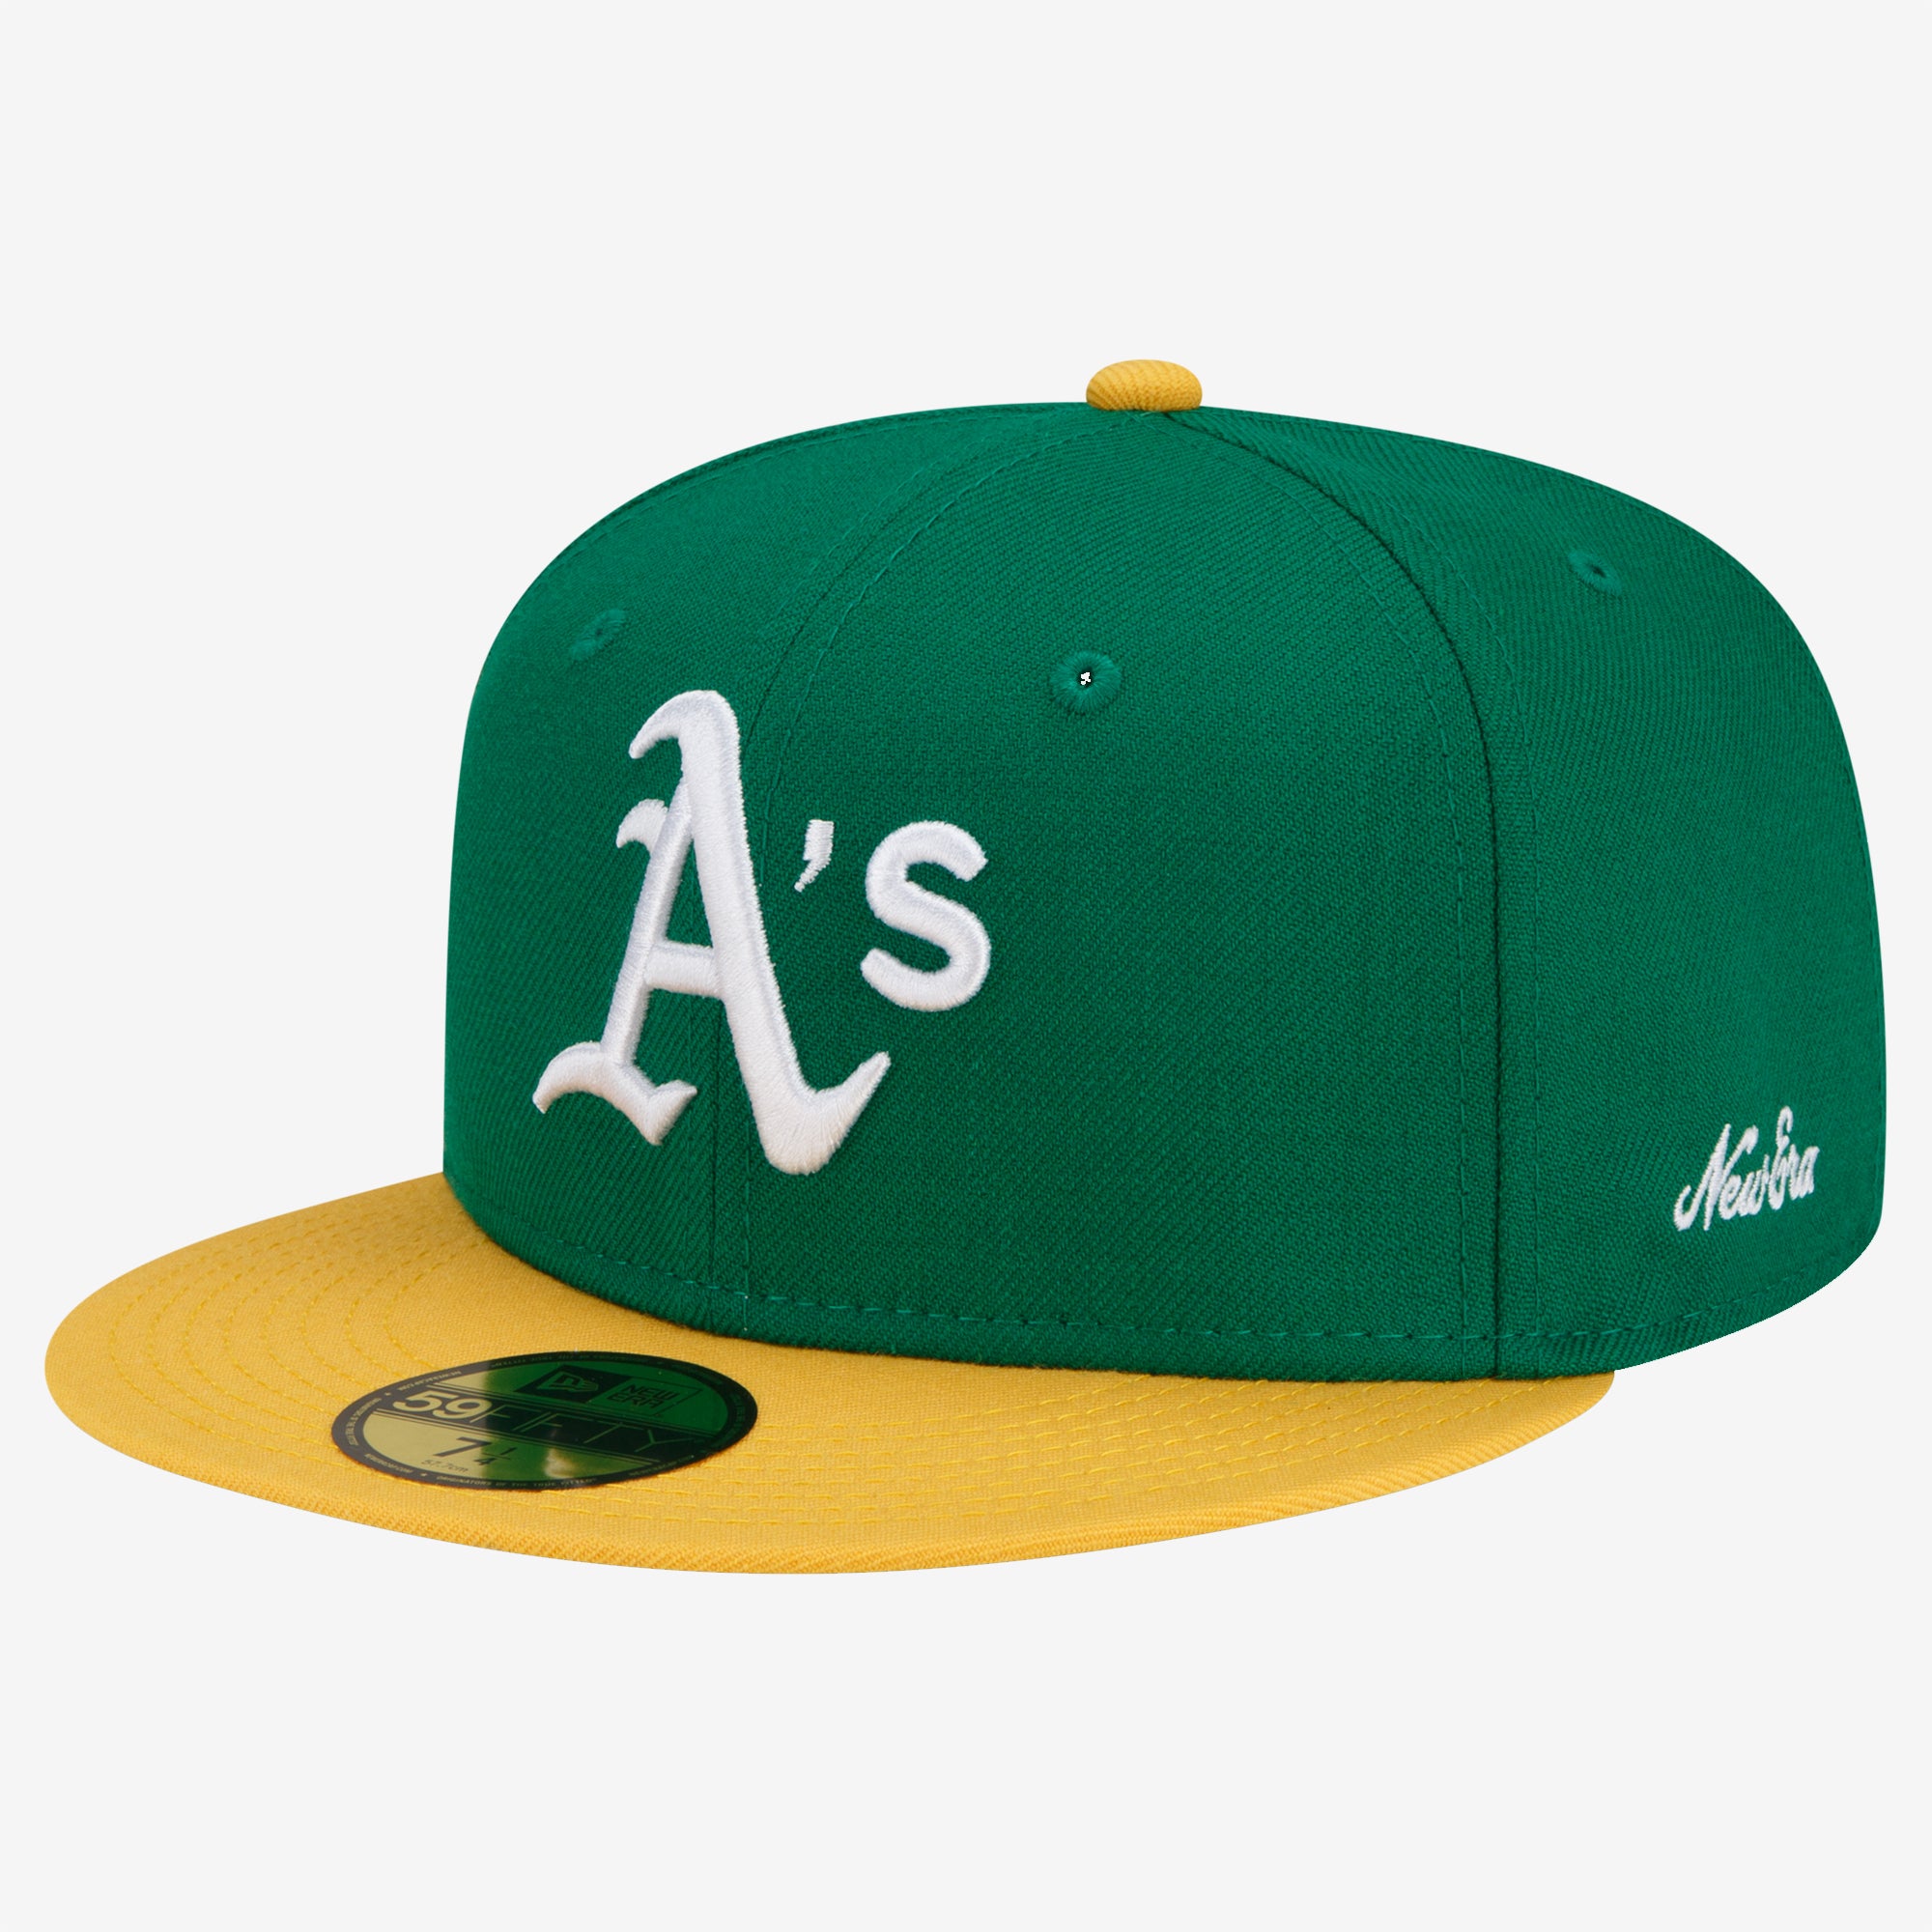 Green cap with embroidered Oakland As on crown, yellow bill with brand sticker, & white embroidered New Era logo on the side.